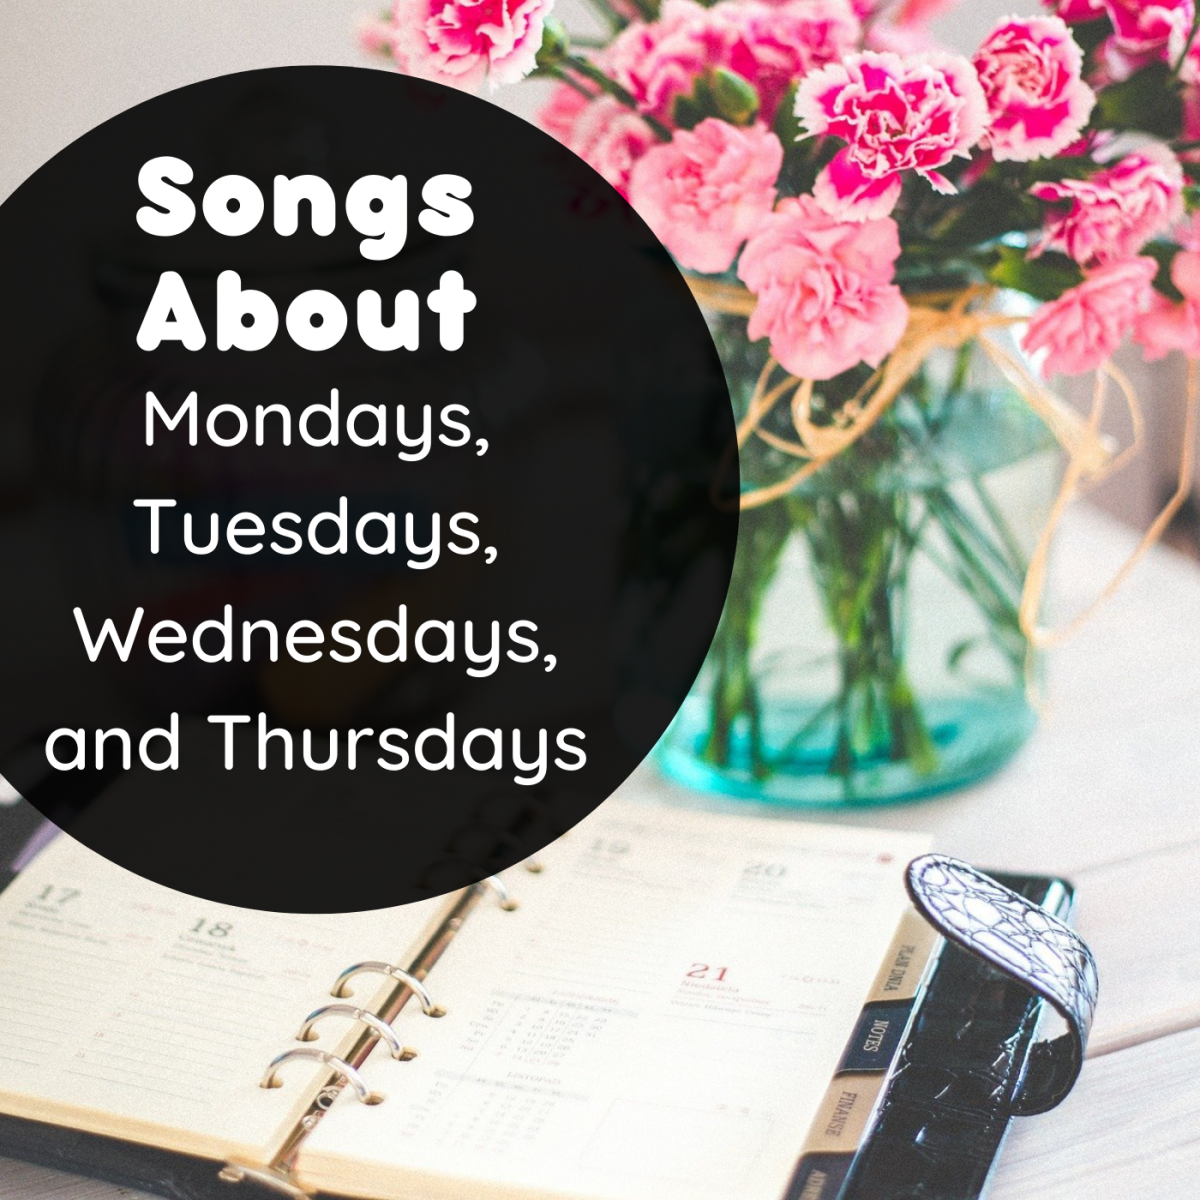 43 Pop, Rock, and Country Songs About Monday, Tuesday, Wednesday, and Thursday